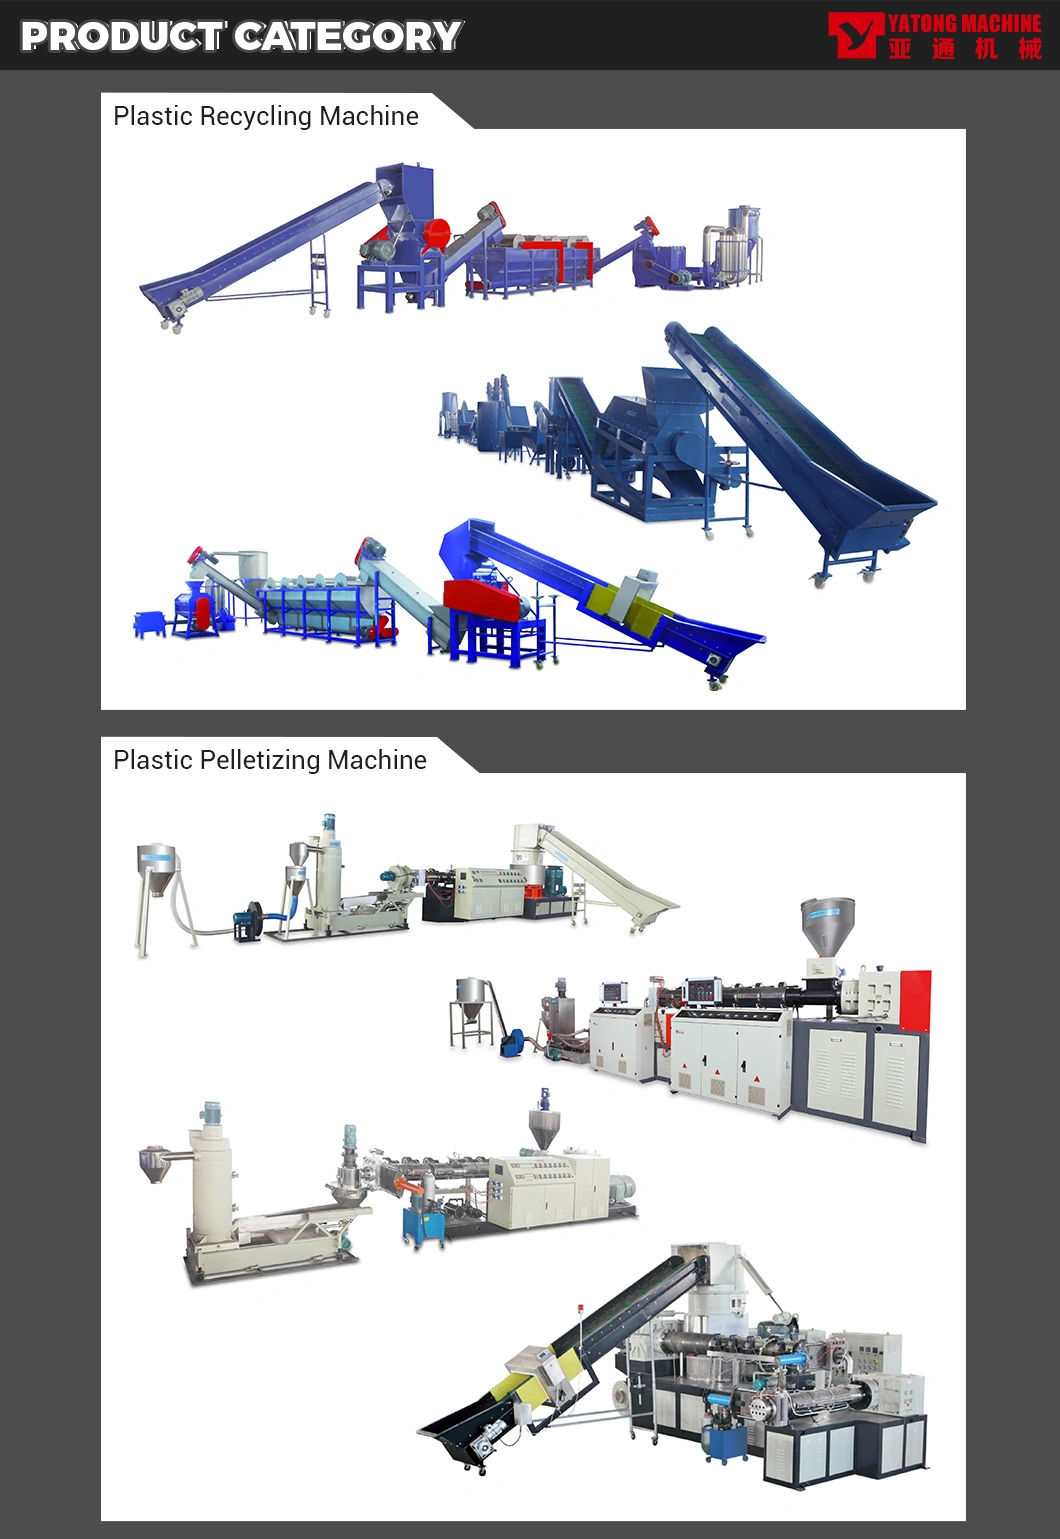 Yatong PE Agriculture Film PP Woven Bags Recycling Machine / Crushing & Washing Machine /Recycling Line